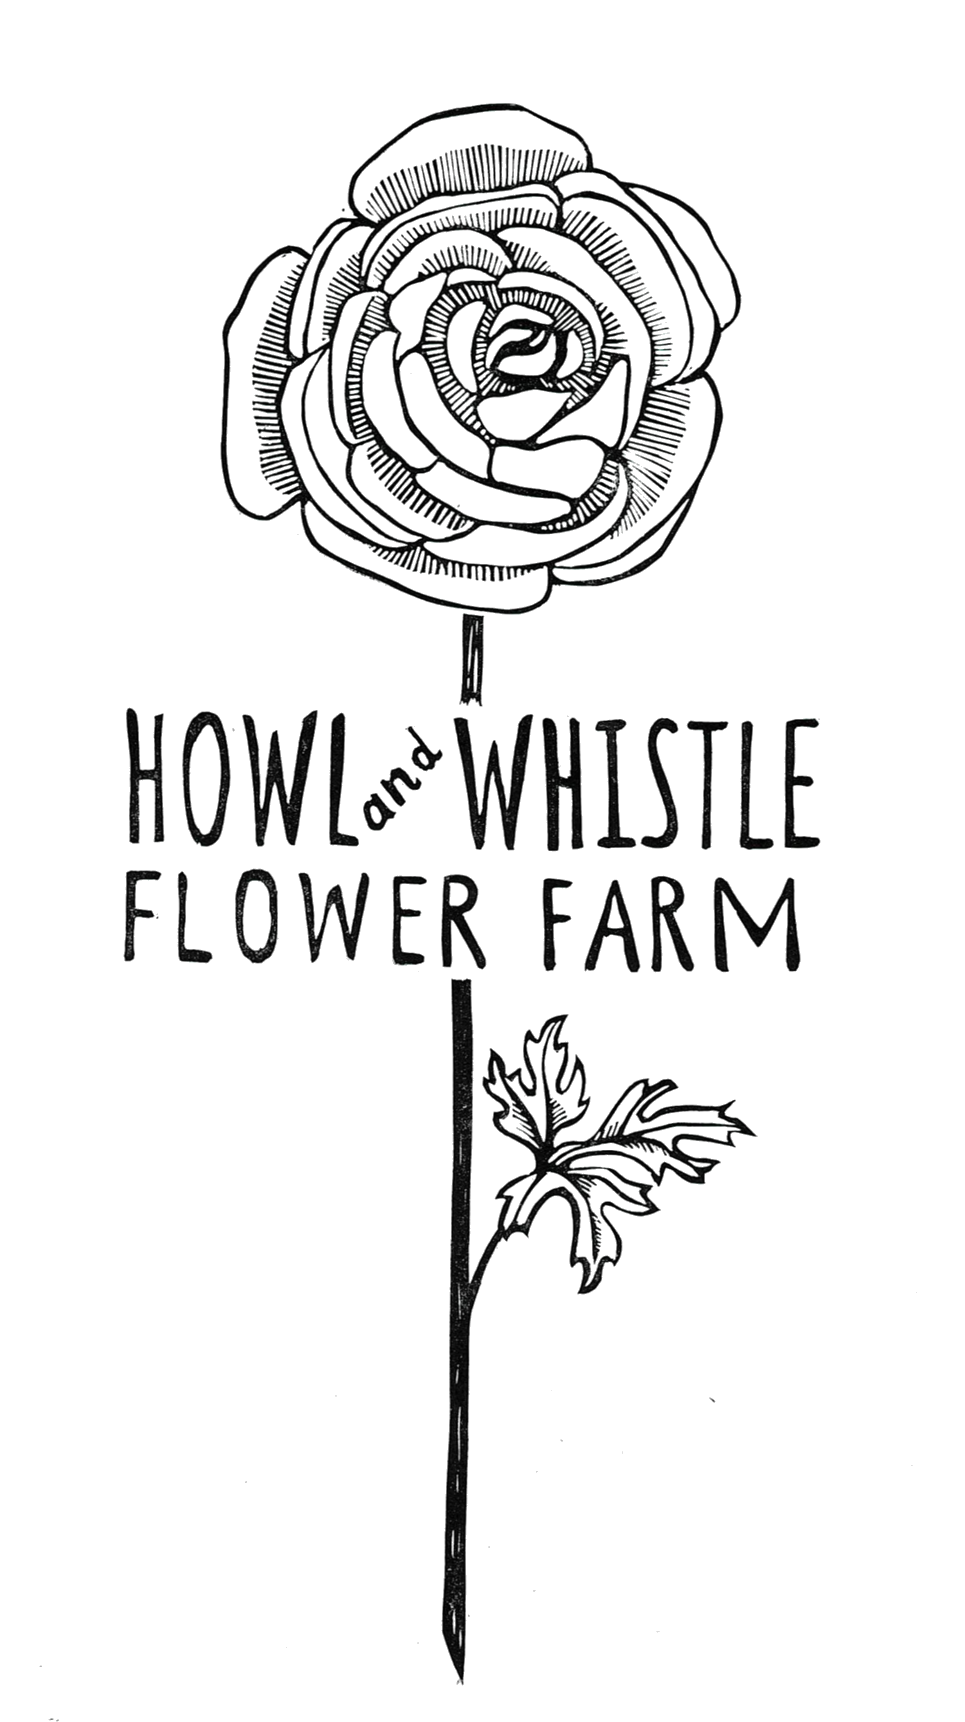 Howl and Whistle Flower Farm